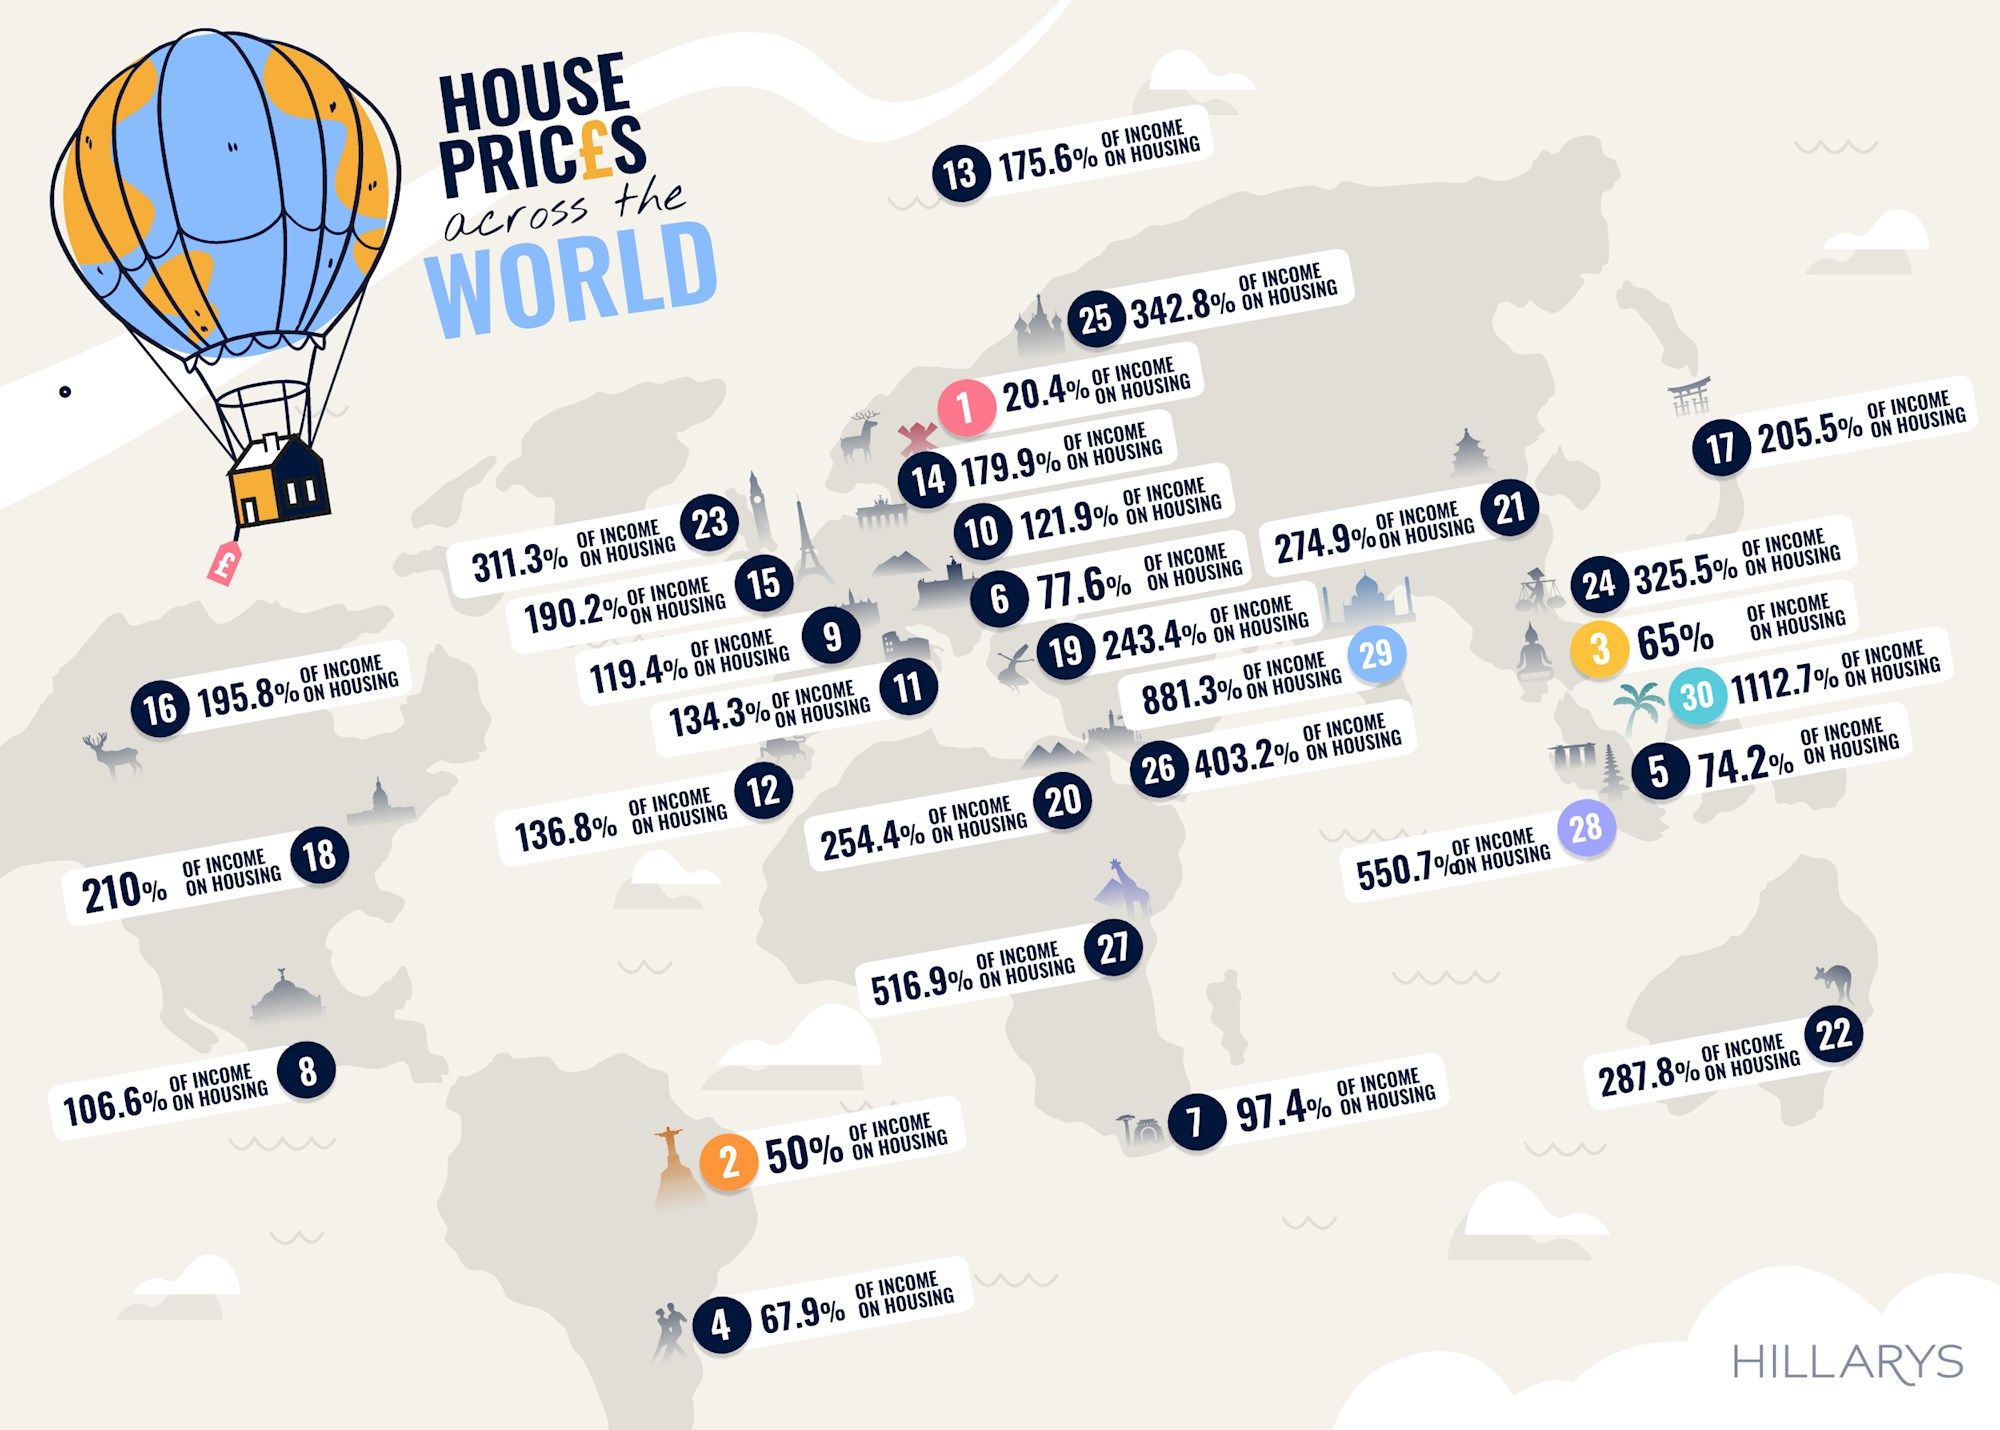 Least affordable countries to buy a house in the world